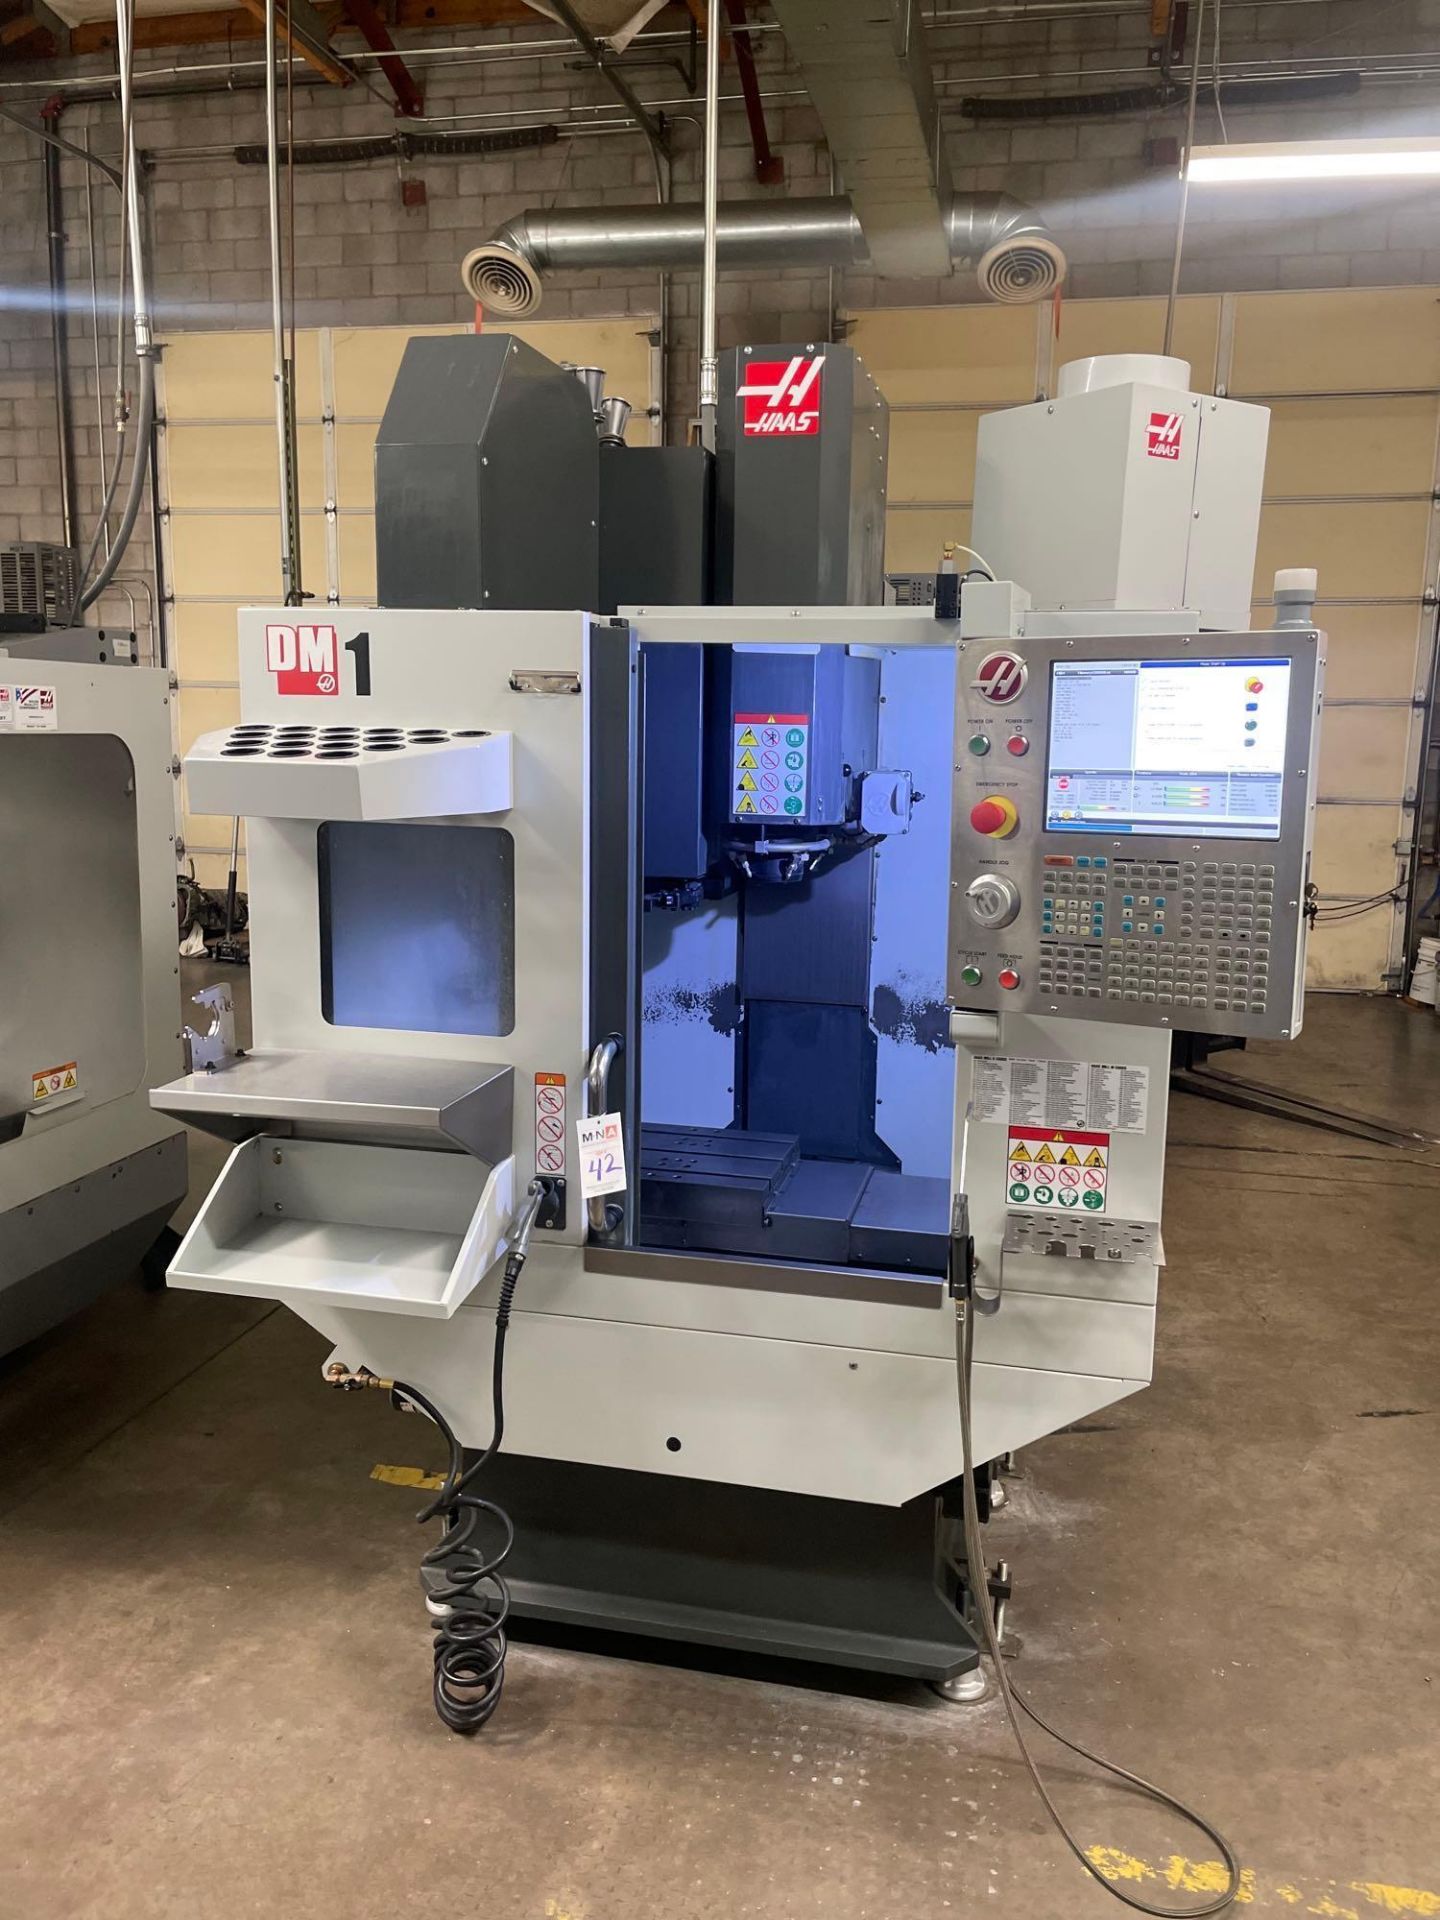 HAAS DM-1 Vertical Machining Center, 4th- Axis Ready, 20” x 16” x 15.5” Trvls., 15k RPM, New 2017 - Image 8 of 12